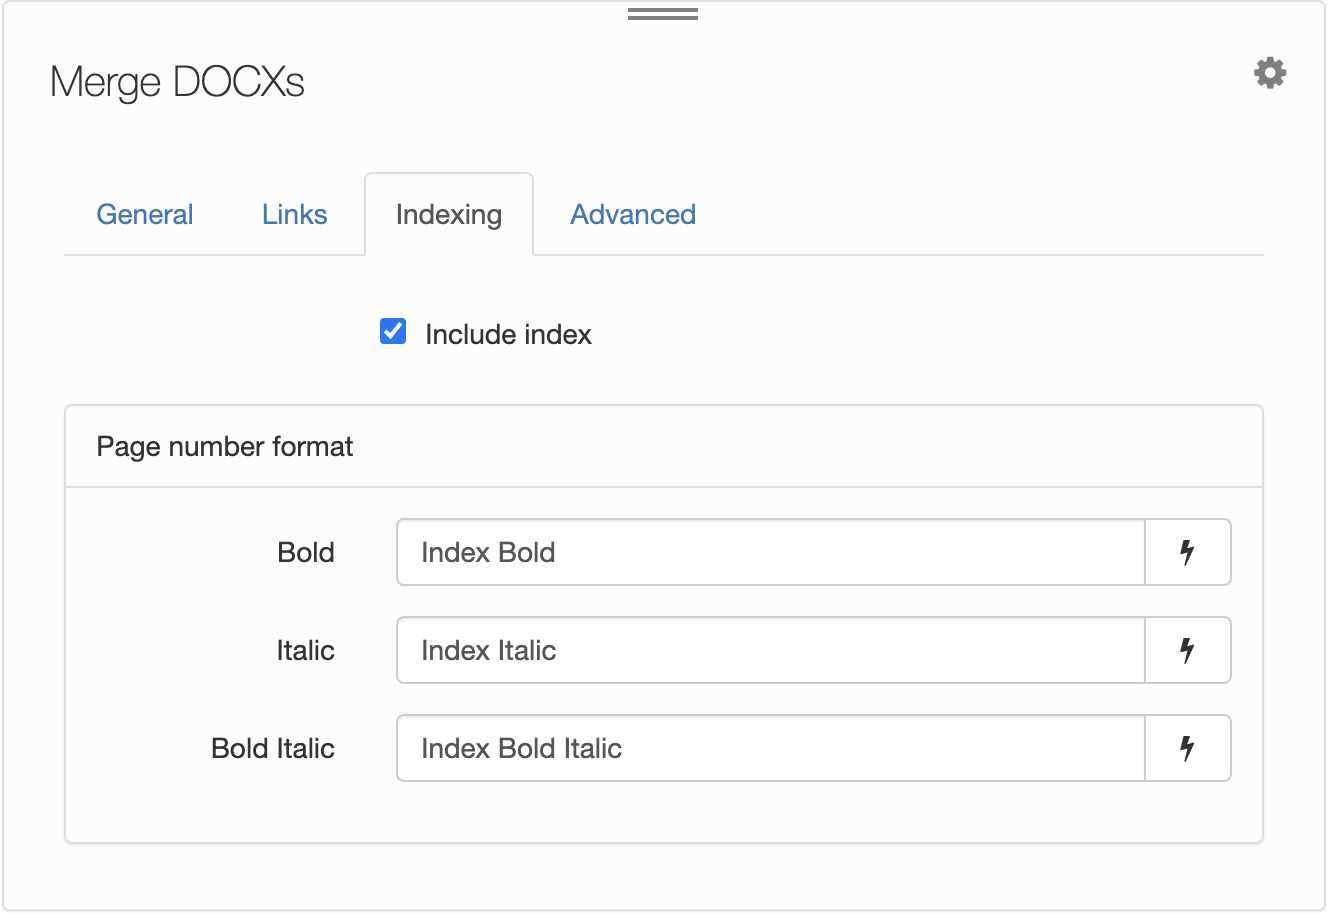 Merge DOCXs, Indexing tab